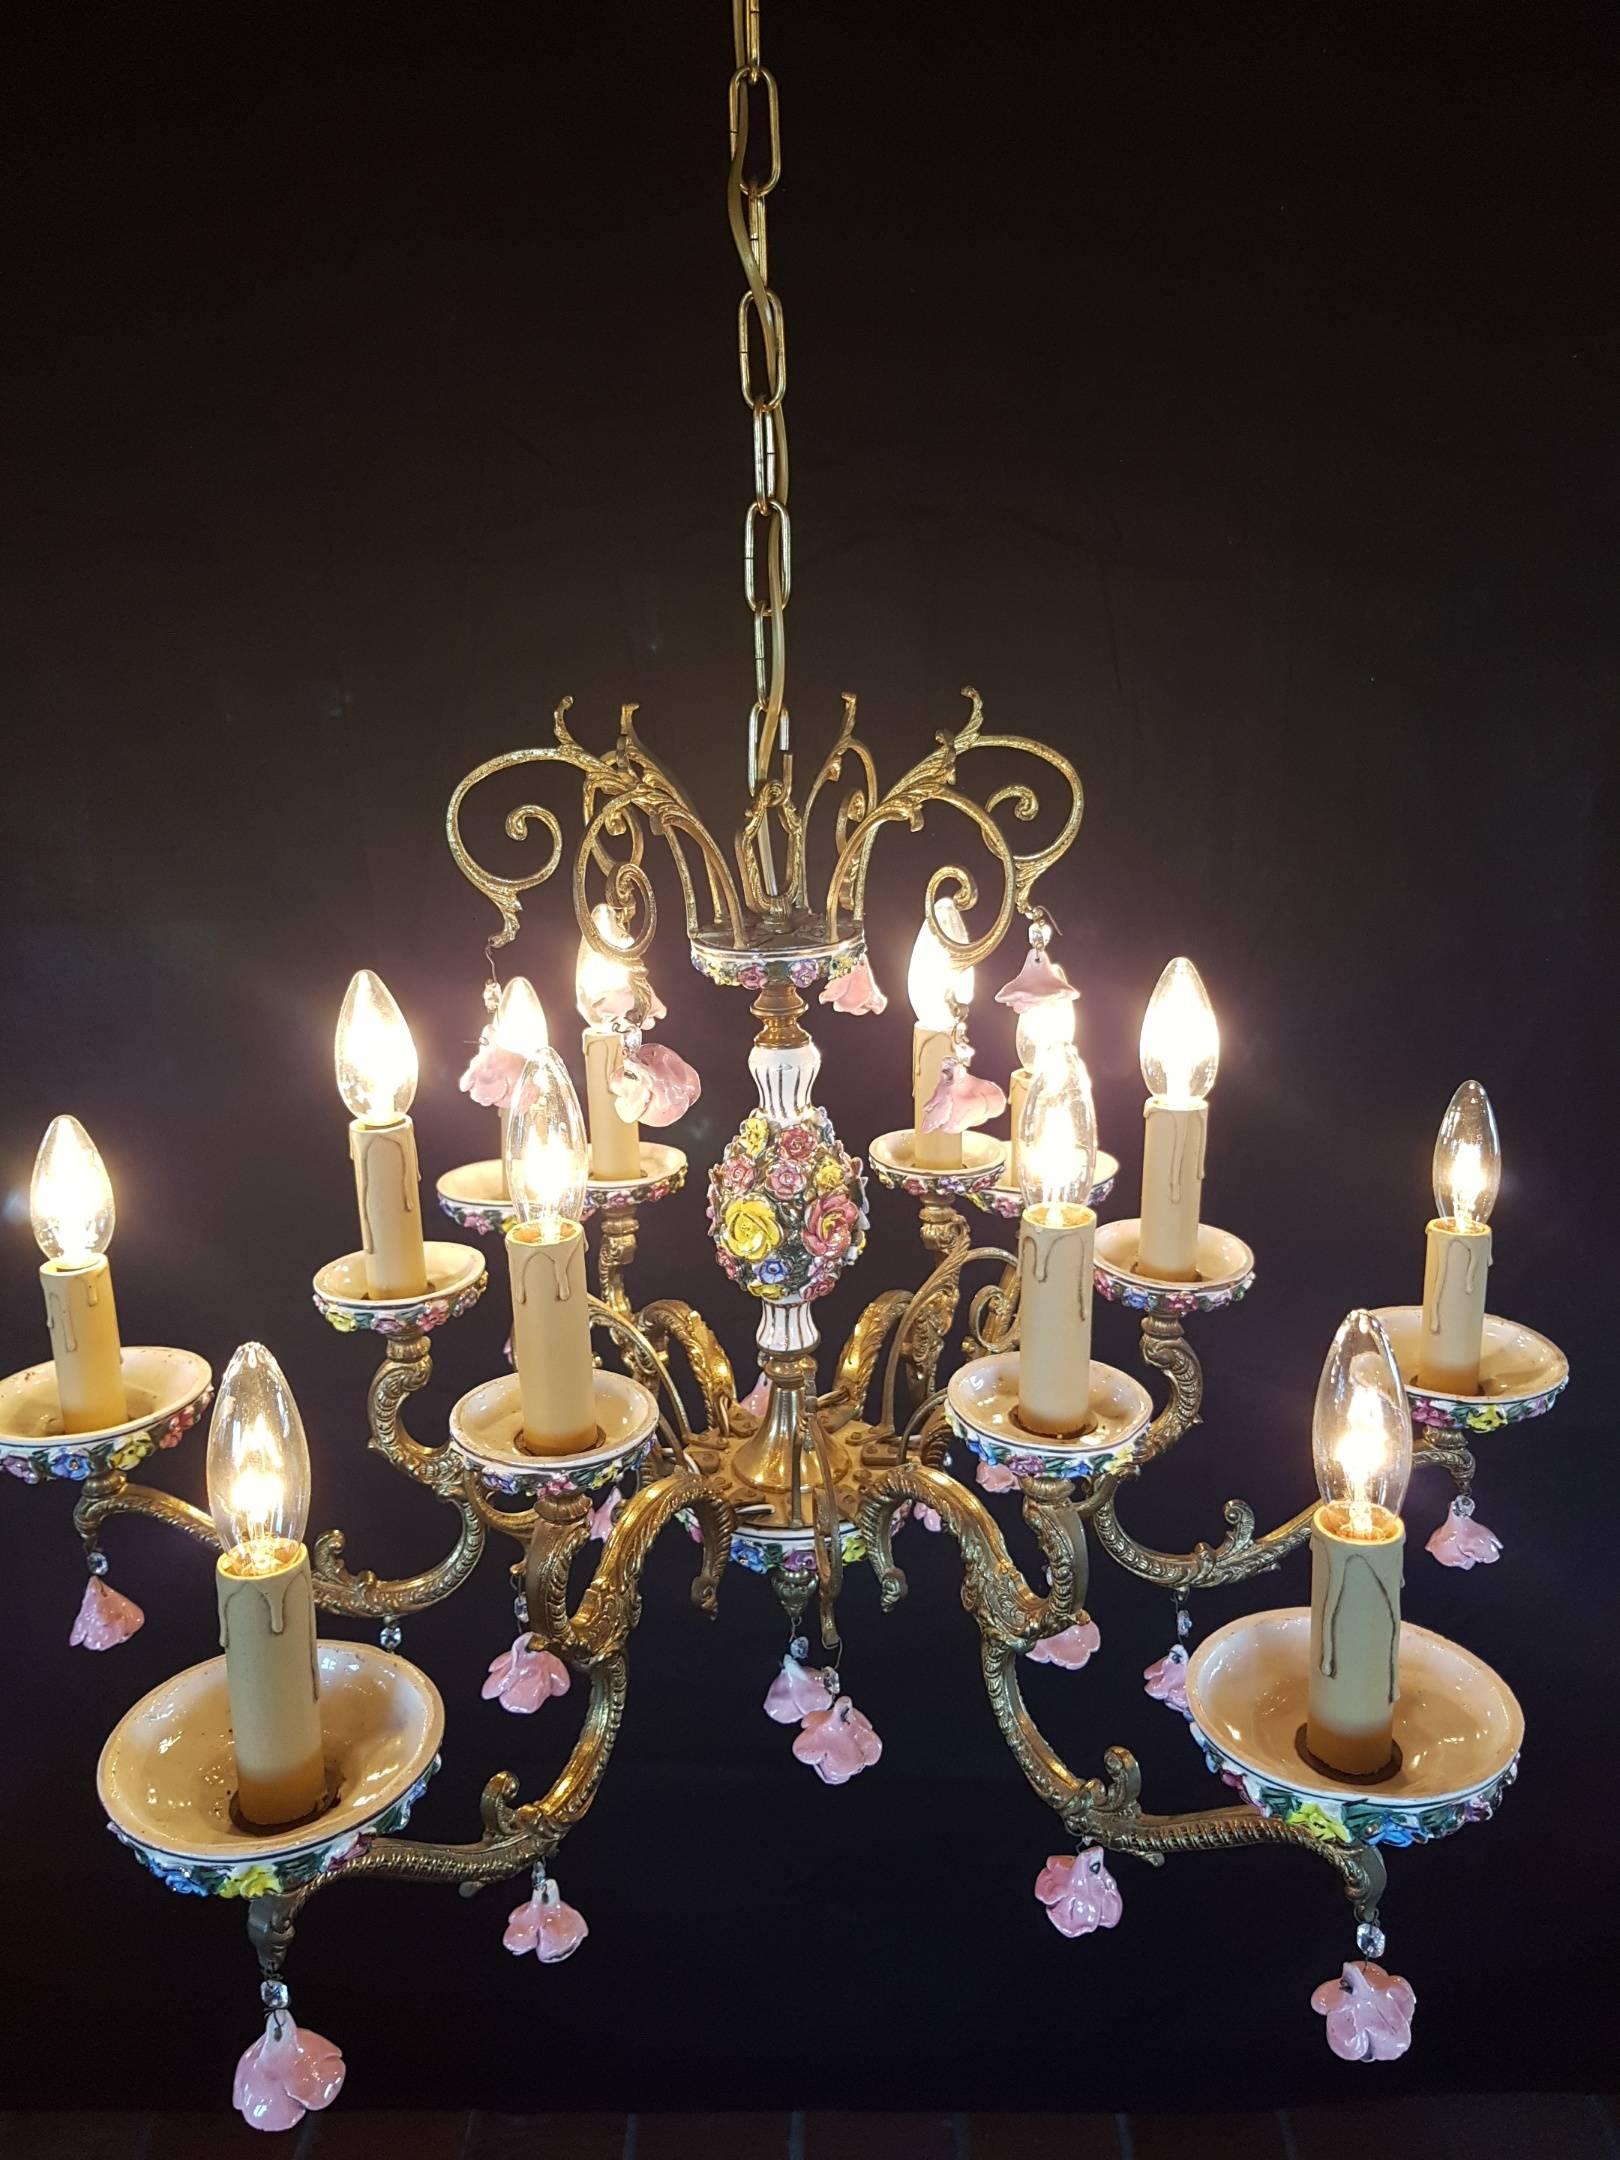 Italian Bronze and Porcelain Chandelier with Flowers, 12 Lights, 20th Century For Sale 9